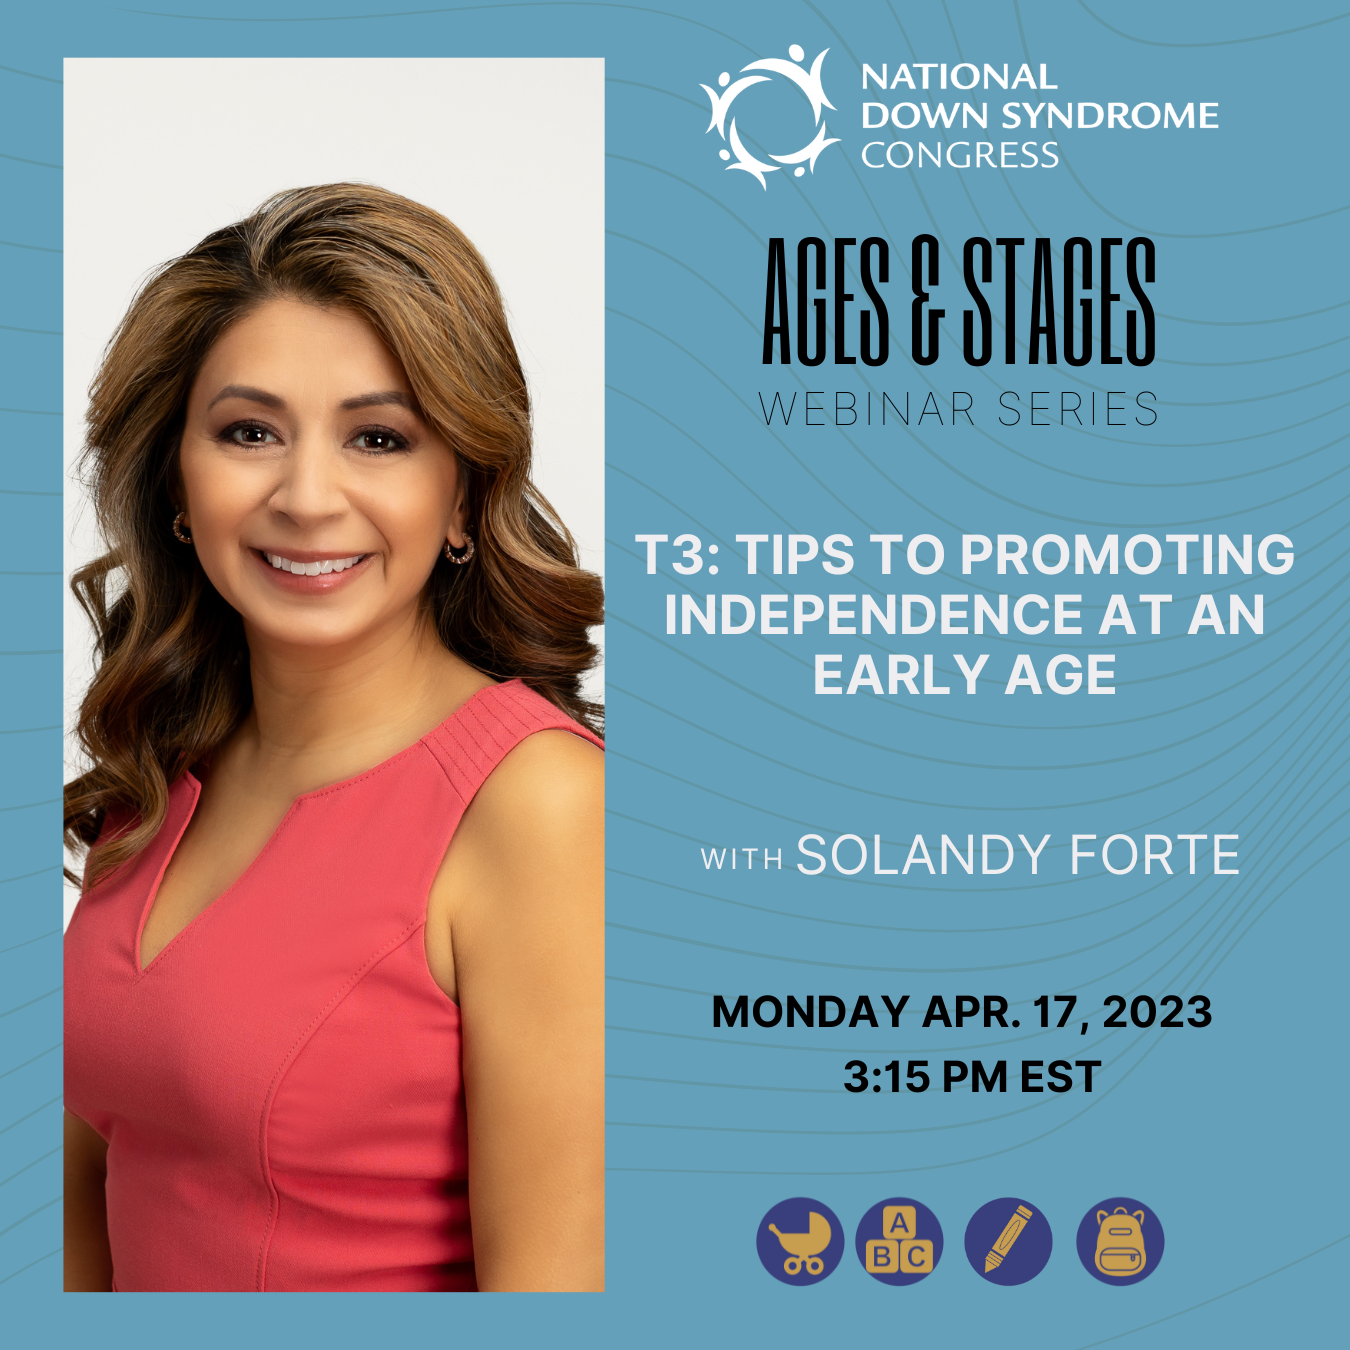 T3: Tips to Promoting Independence at an Early Age